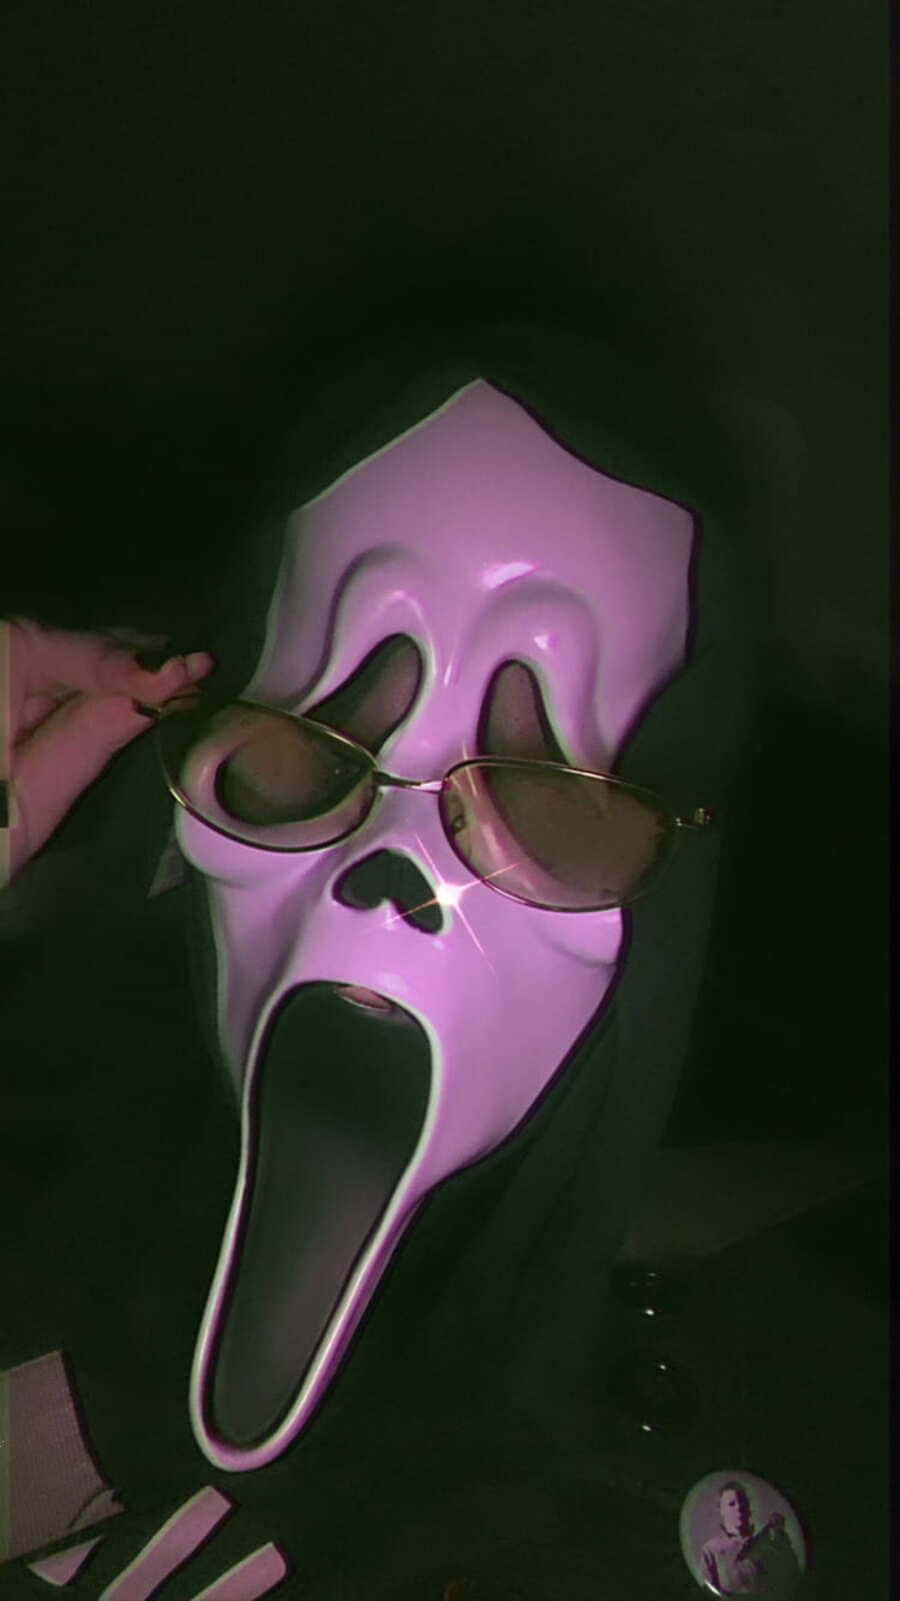 Mysterious Ghostface Aesthetic with Chilling Vibes Wallpaper